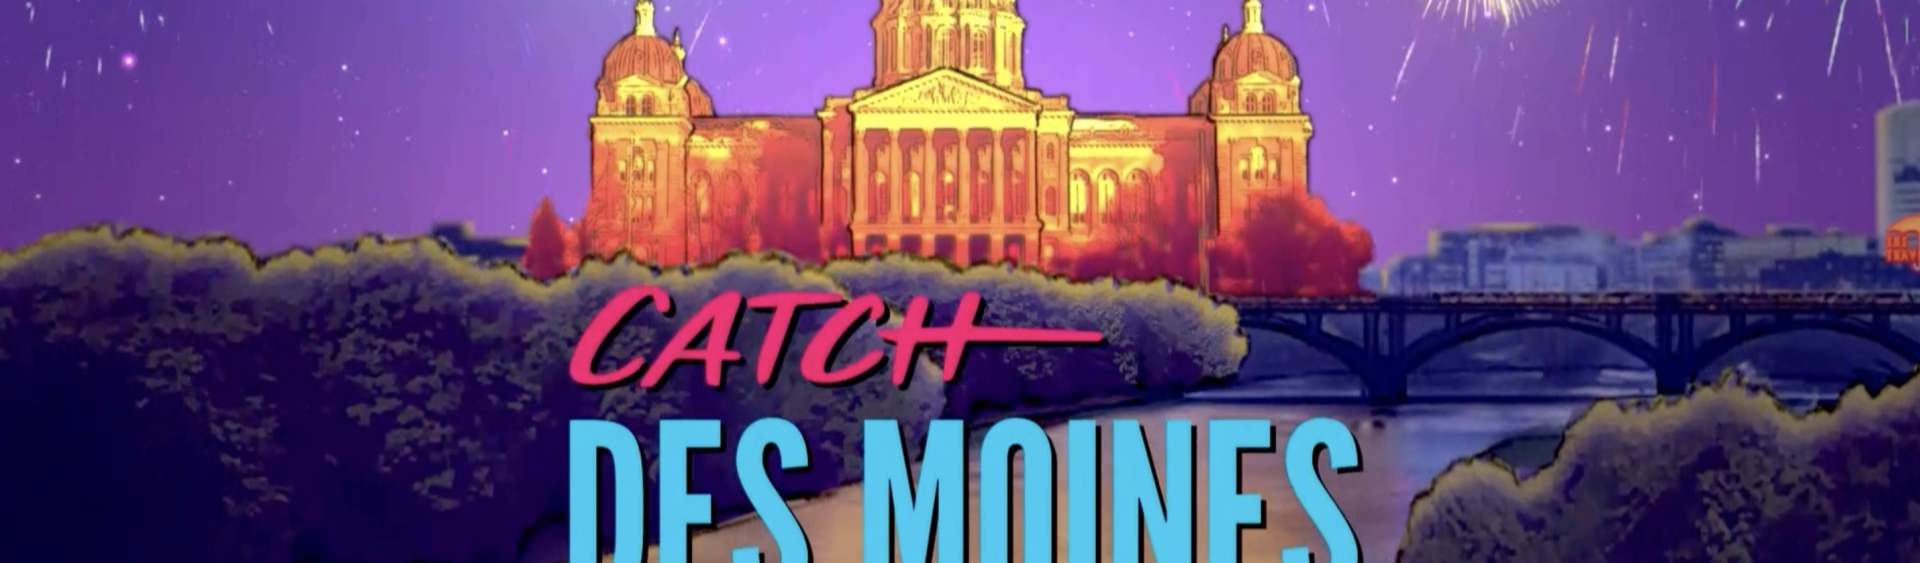 What's Happening this week with Catch Des Moines